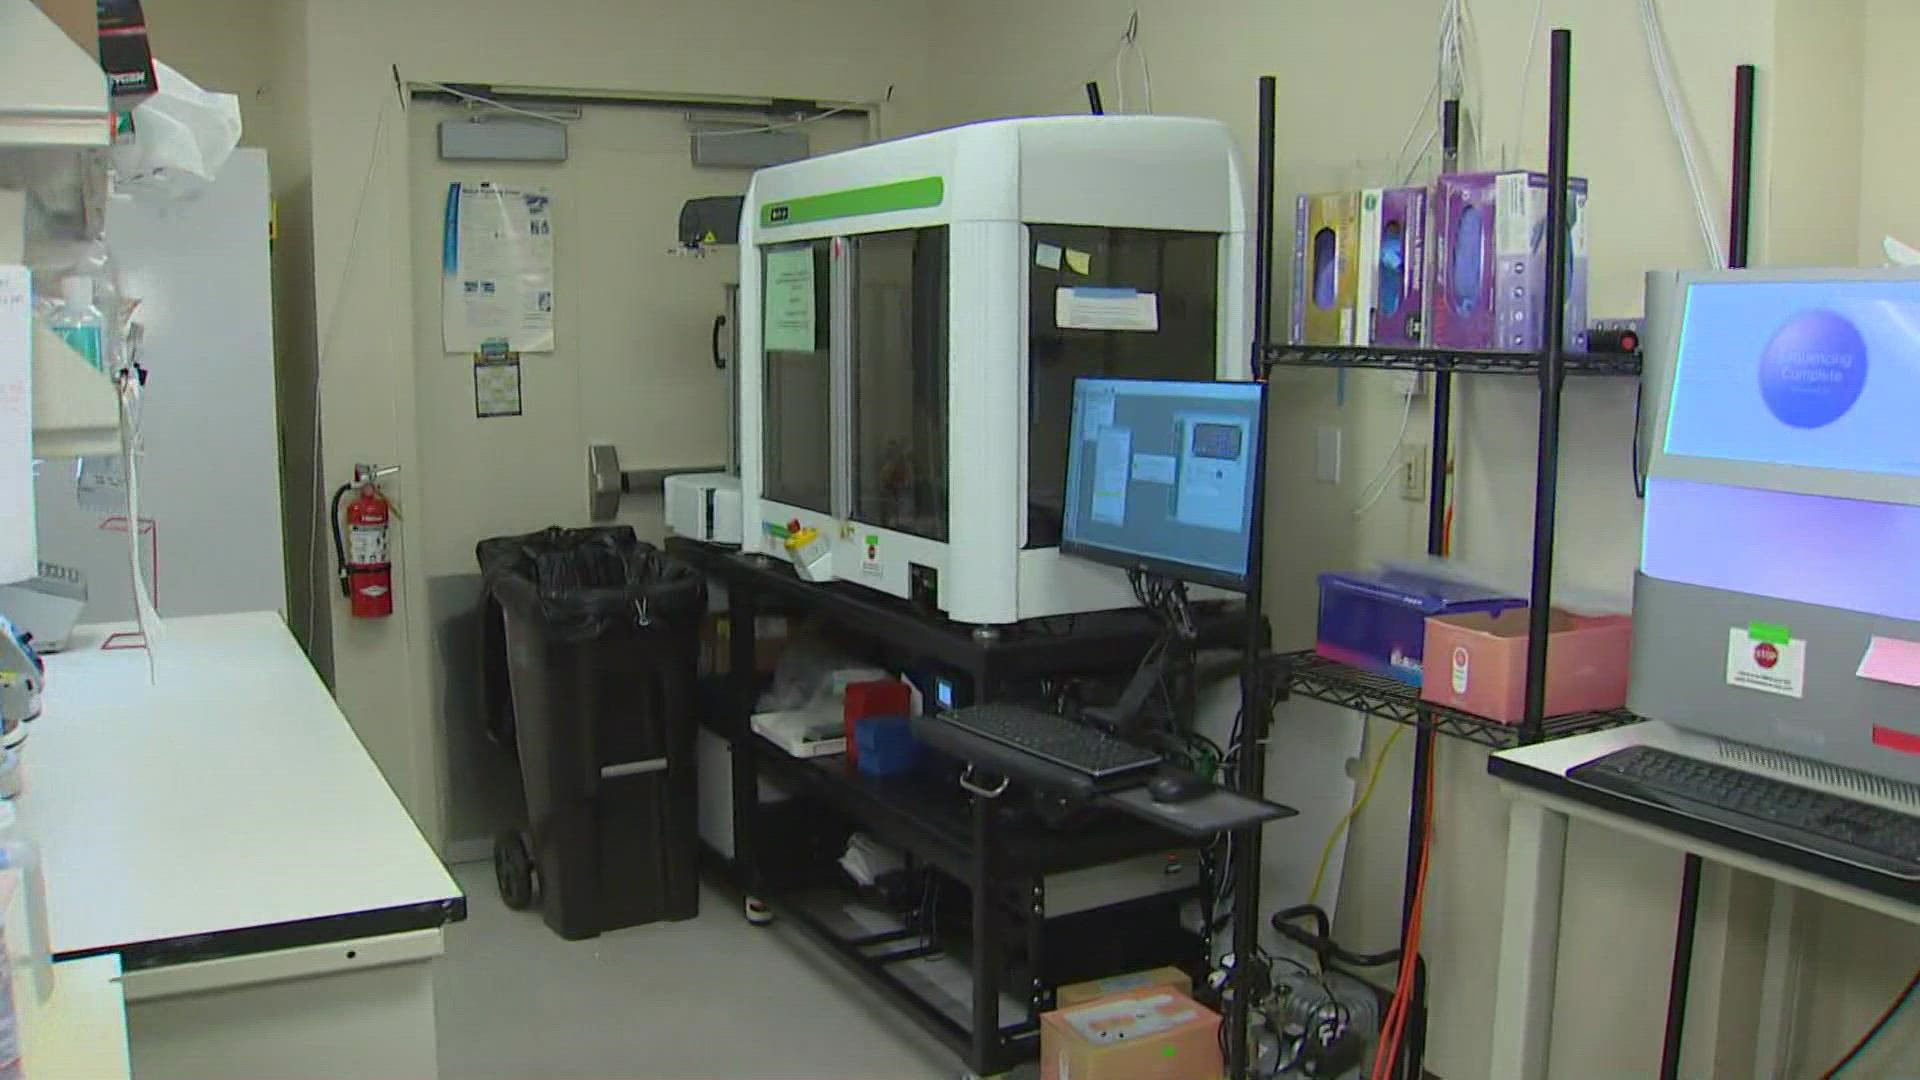 KING 5's Angeli Kakade gets an exclusive walkthrough of UW Medicine's genome sequencing lab as scientists attempt to locate cases of the omicron COVID-19 variant